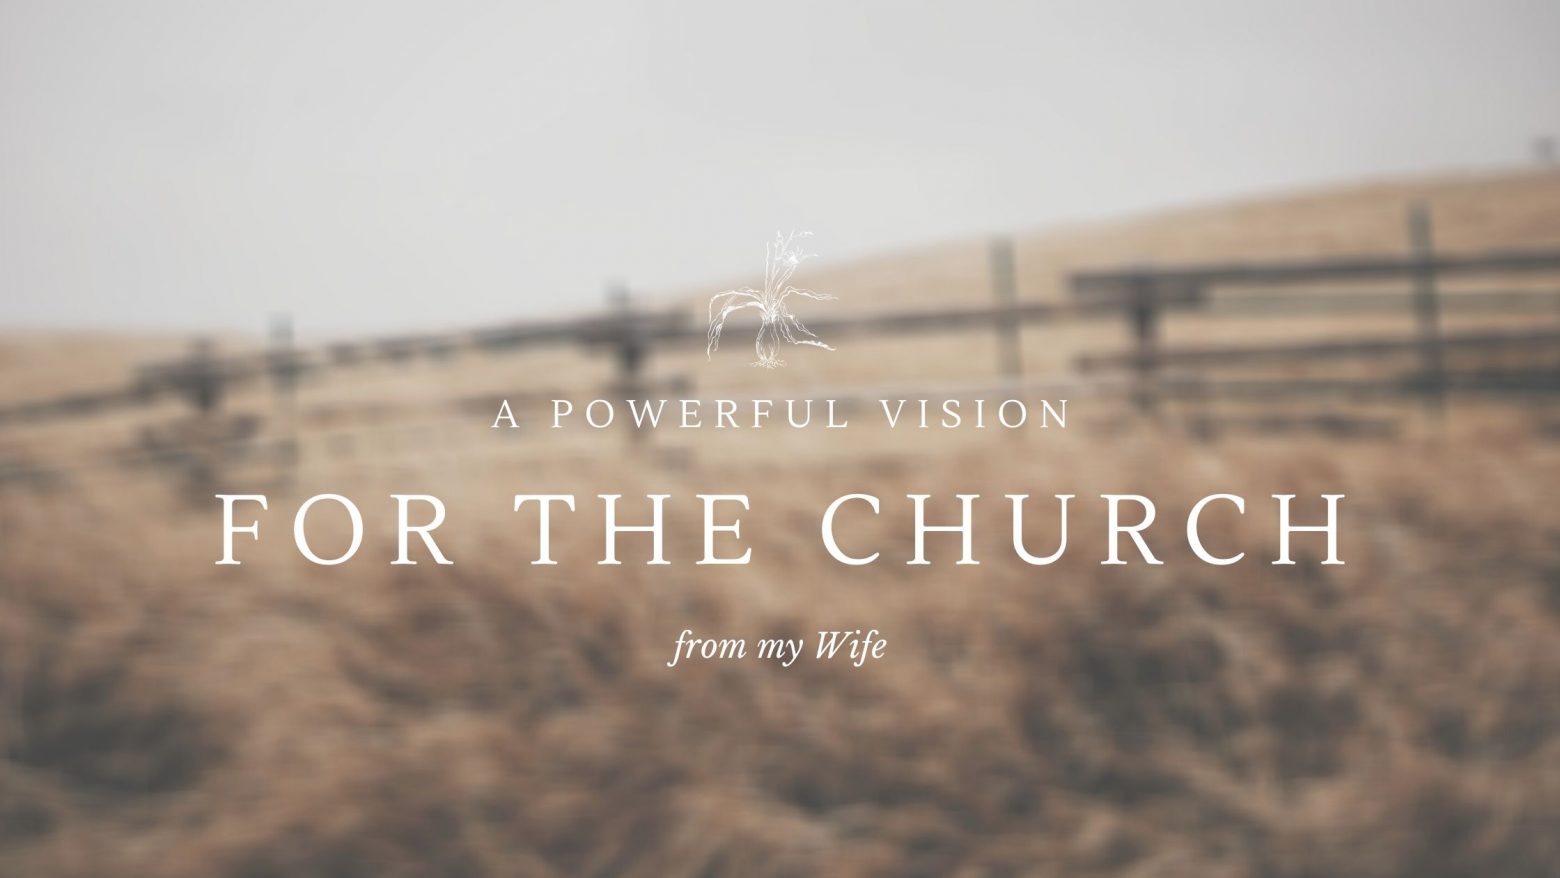 A Powerful Vision For The Church